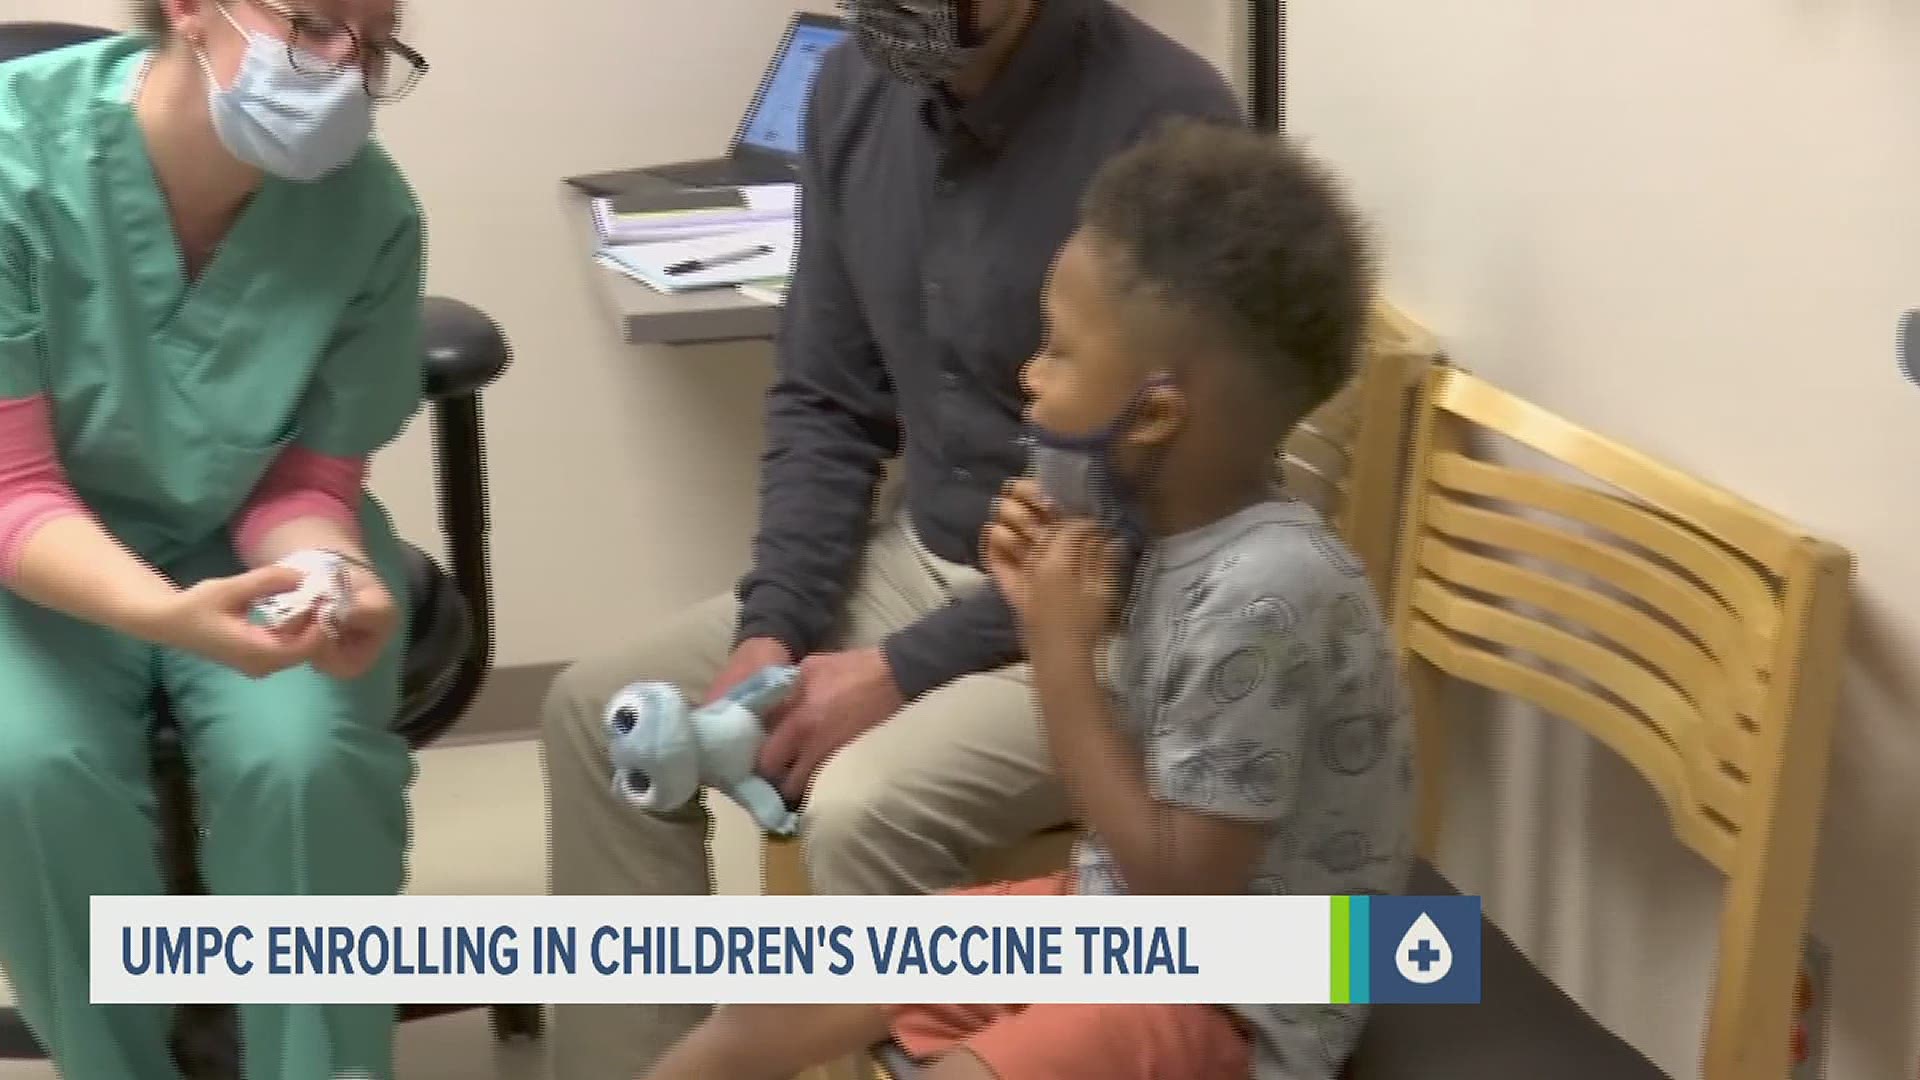 The trial will evaluate the effectiveness of the vaccine in children ages 6 months to 12 years.